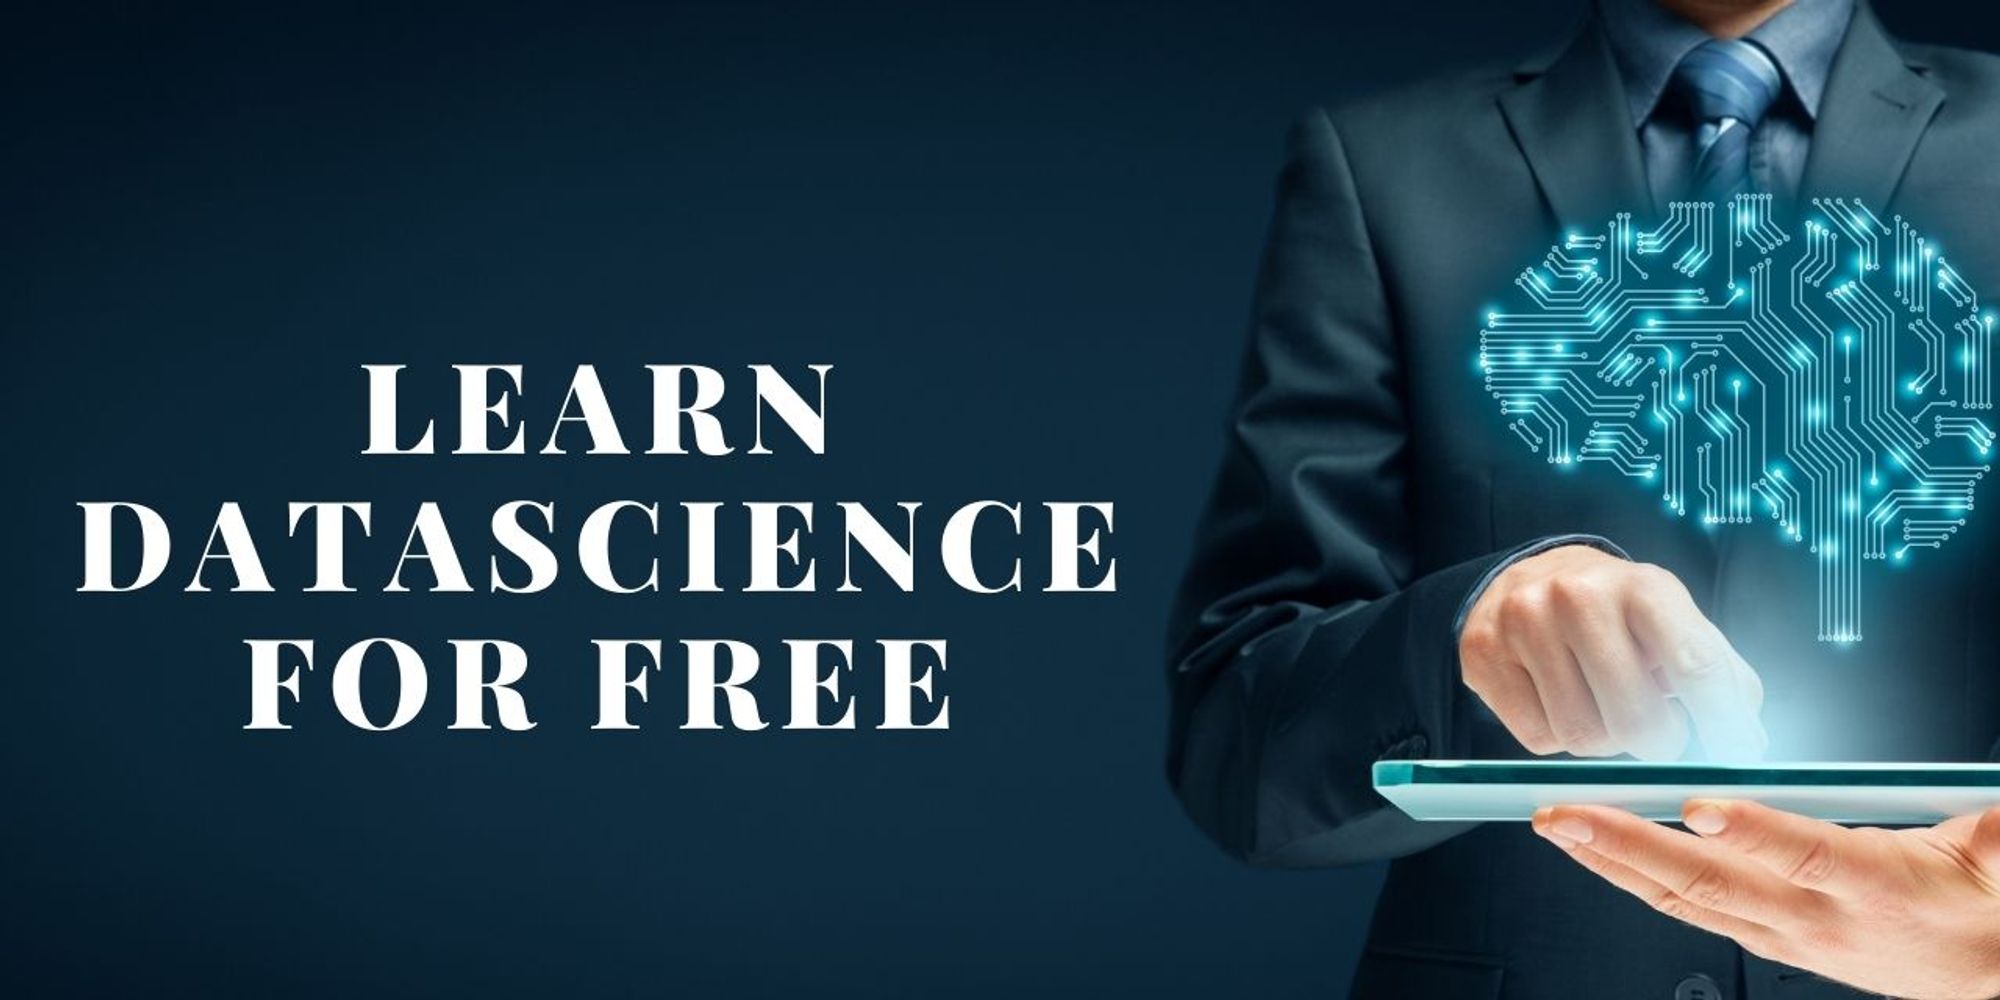 therealsreehari/Learn-Data-Science-For-Free